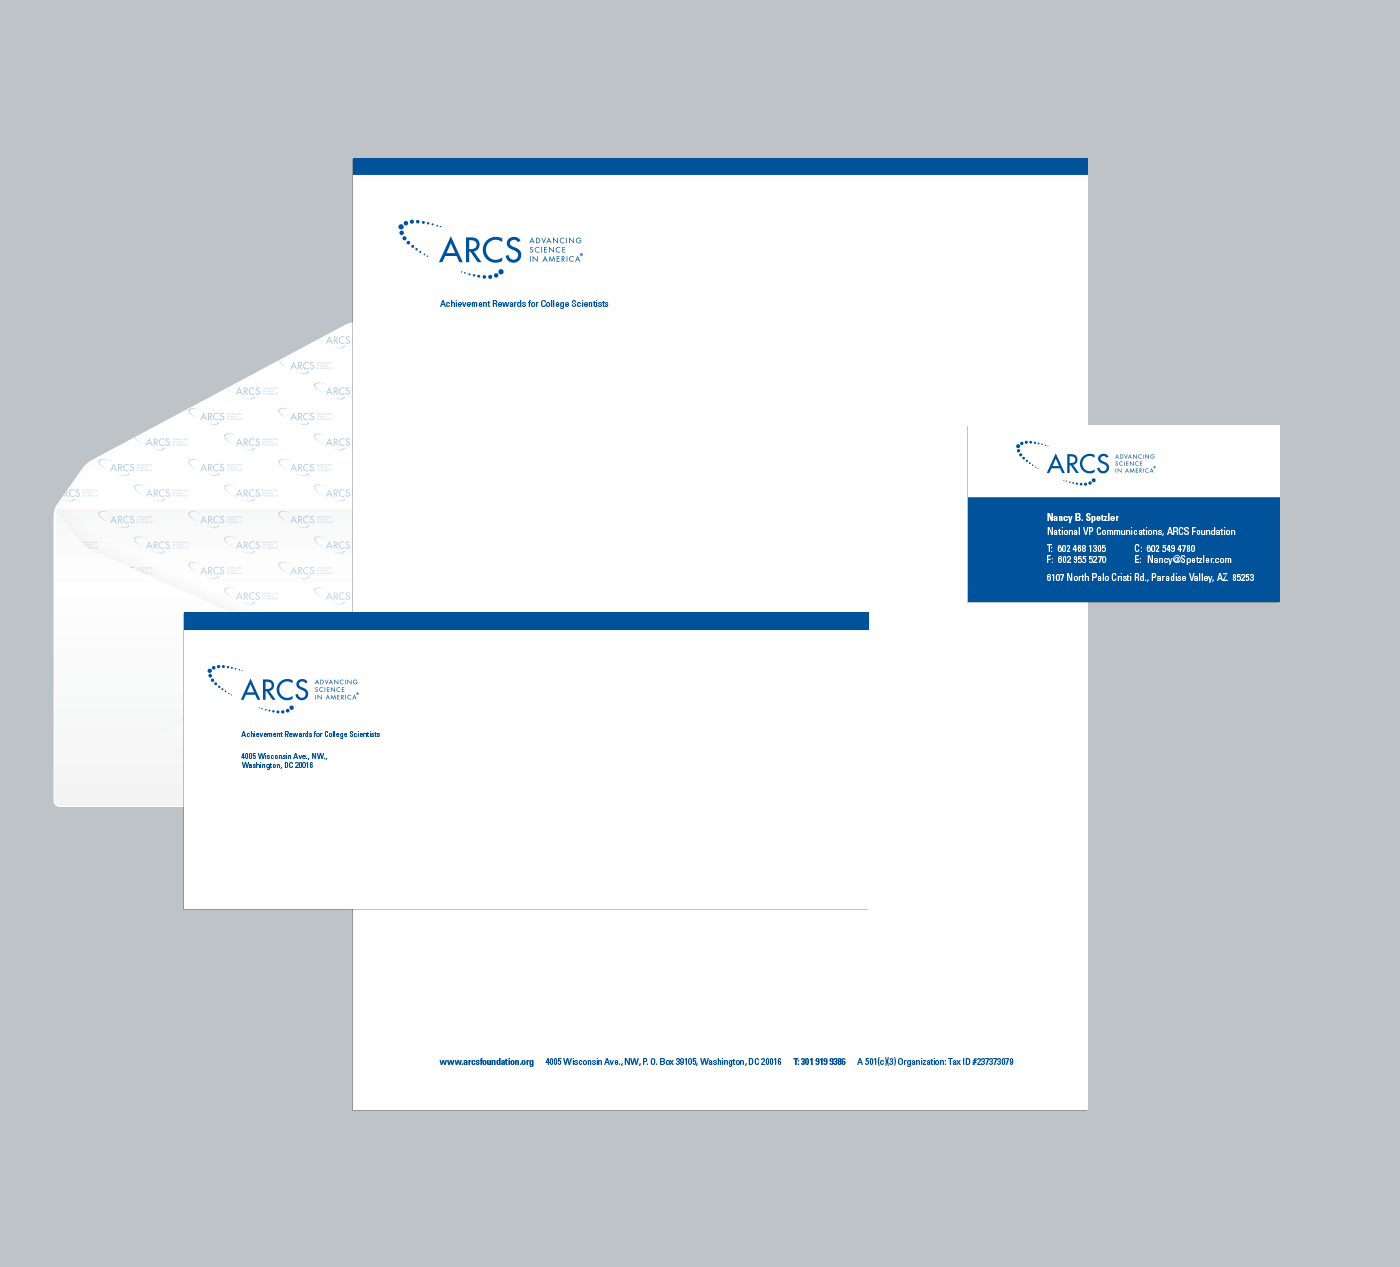 ARCS Education non-profit Collateral tri-fold brochure folder PPT Powerpoint presentation lapel pin Stationery certificate newsletter redesign